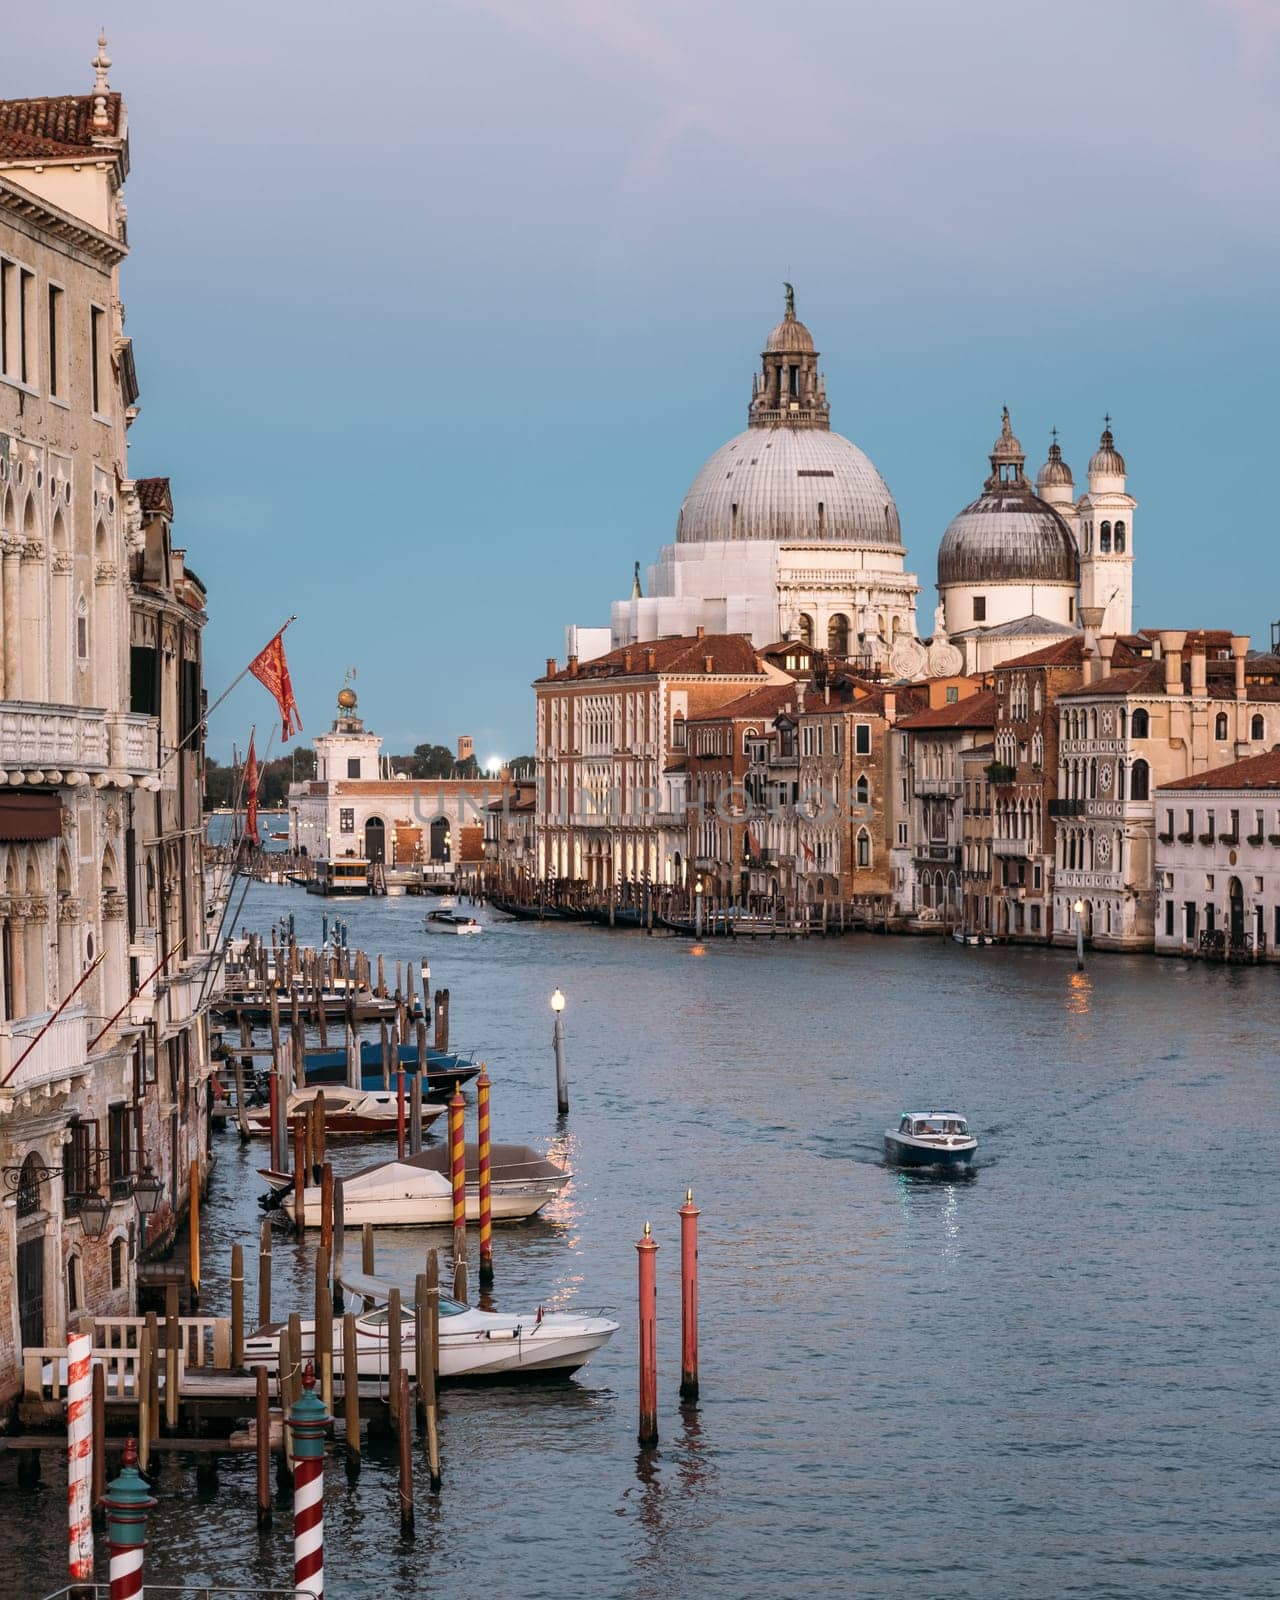 Scenic view of the Salute Roman Catholic church and minor basilica located in Punta della Dogana in the Dorsoduro sestiere of the city of Venice Italy on a cloudless summer evening. Copyspace.